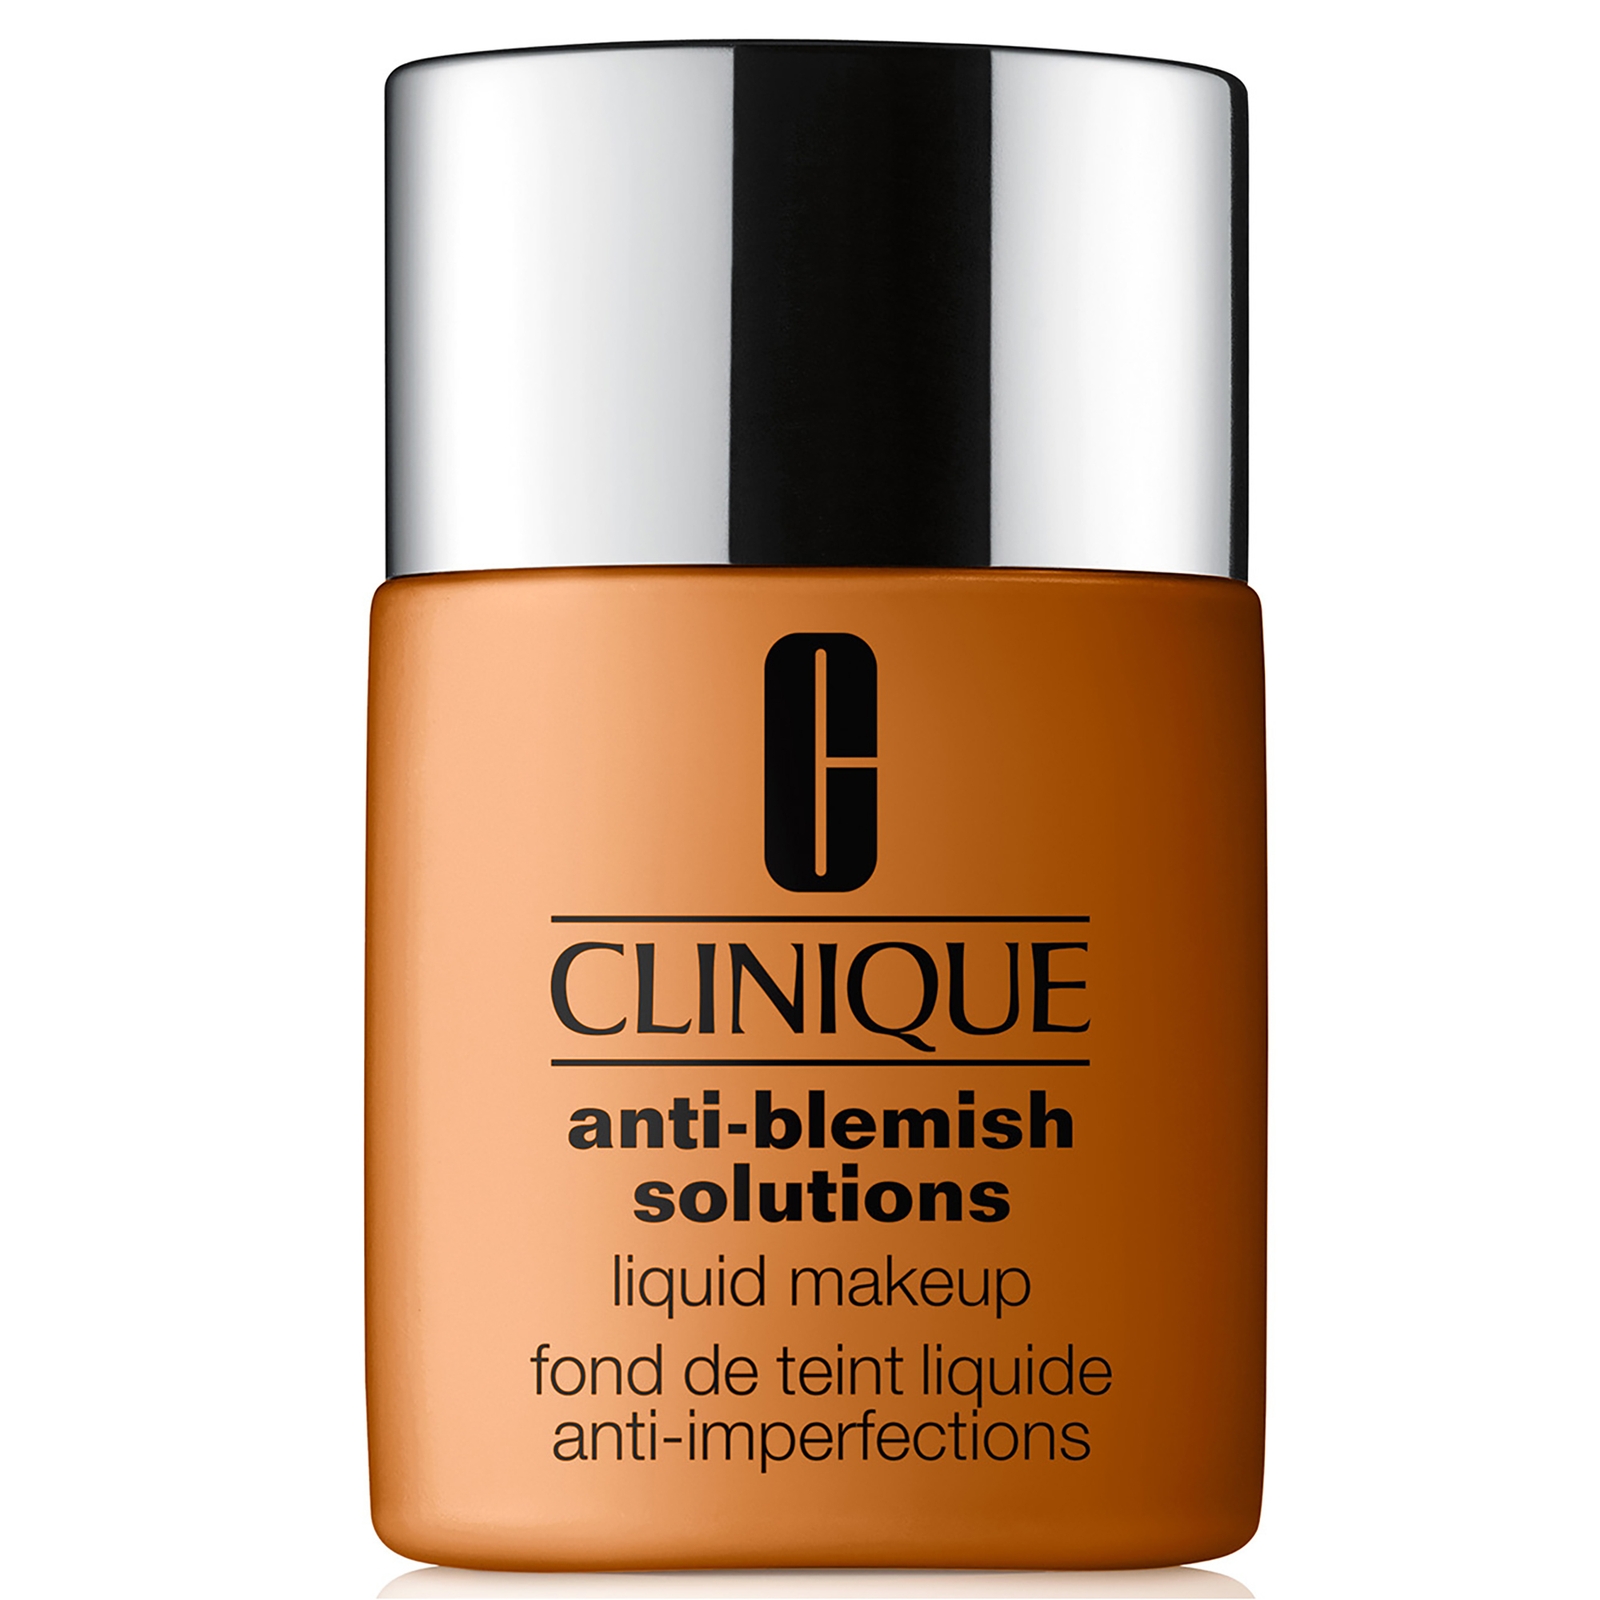 Clinique Anti-Blemish Solutions Liquid Makeup with Salicylic Acid 30ml (Various Shades) - WN 112 Ginger